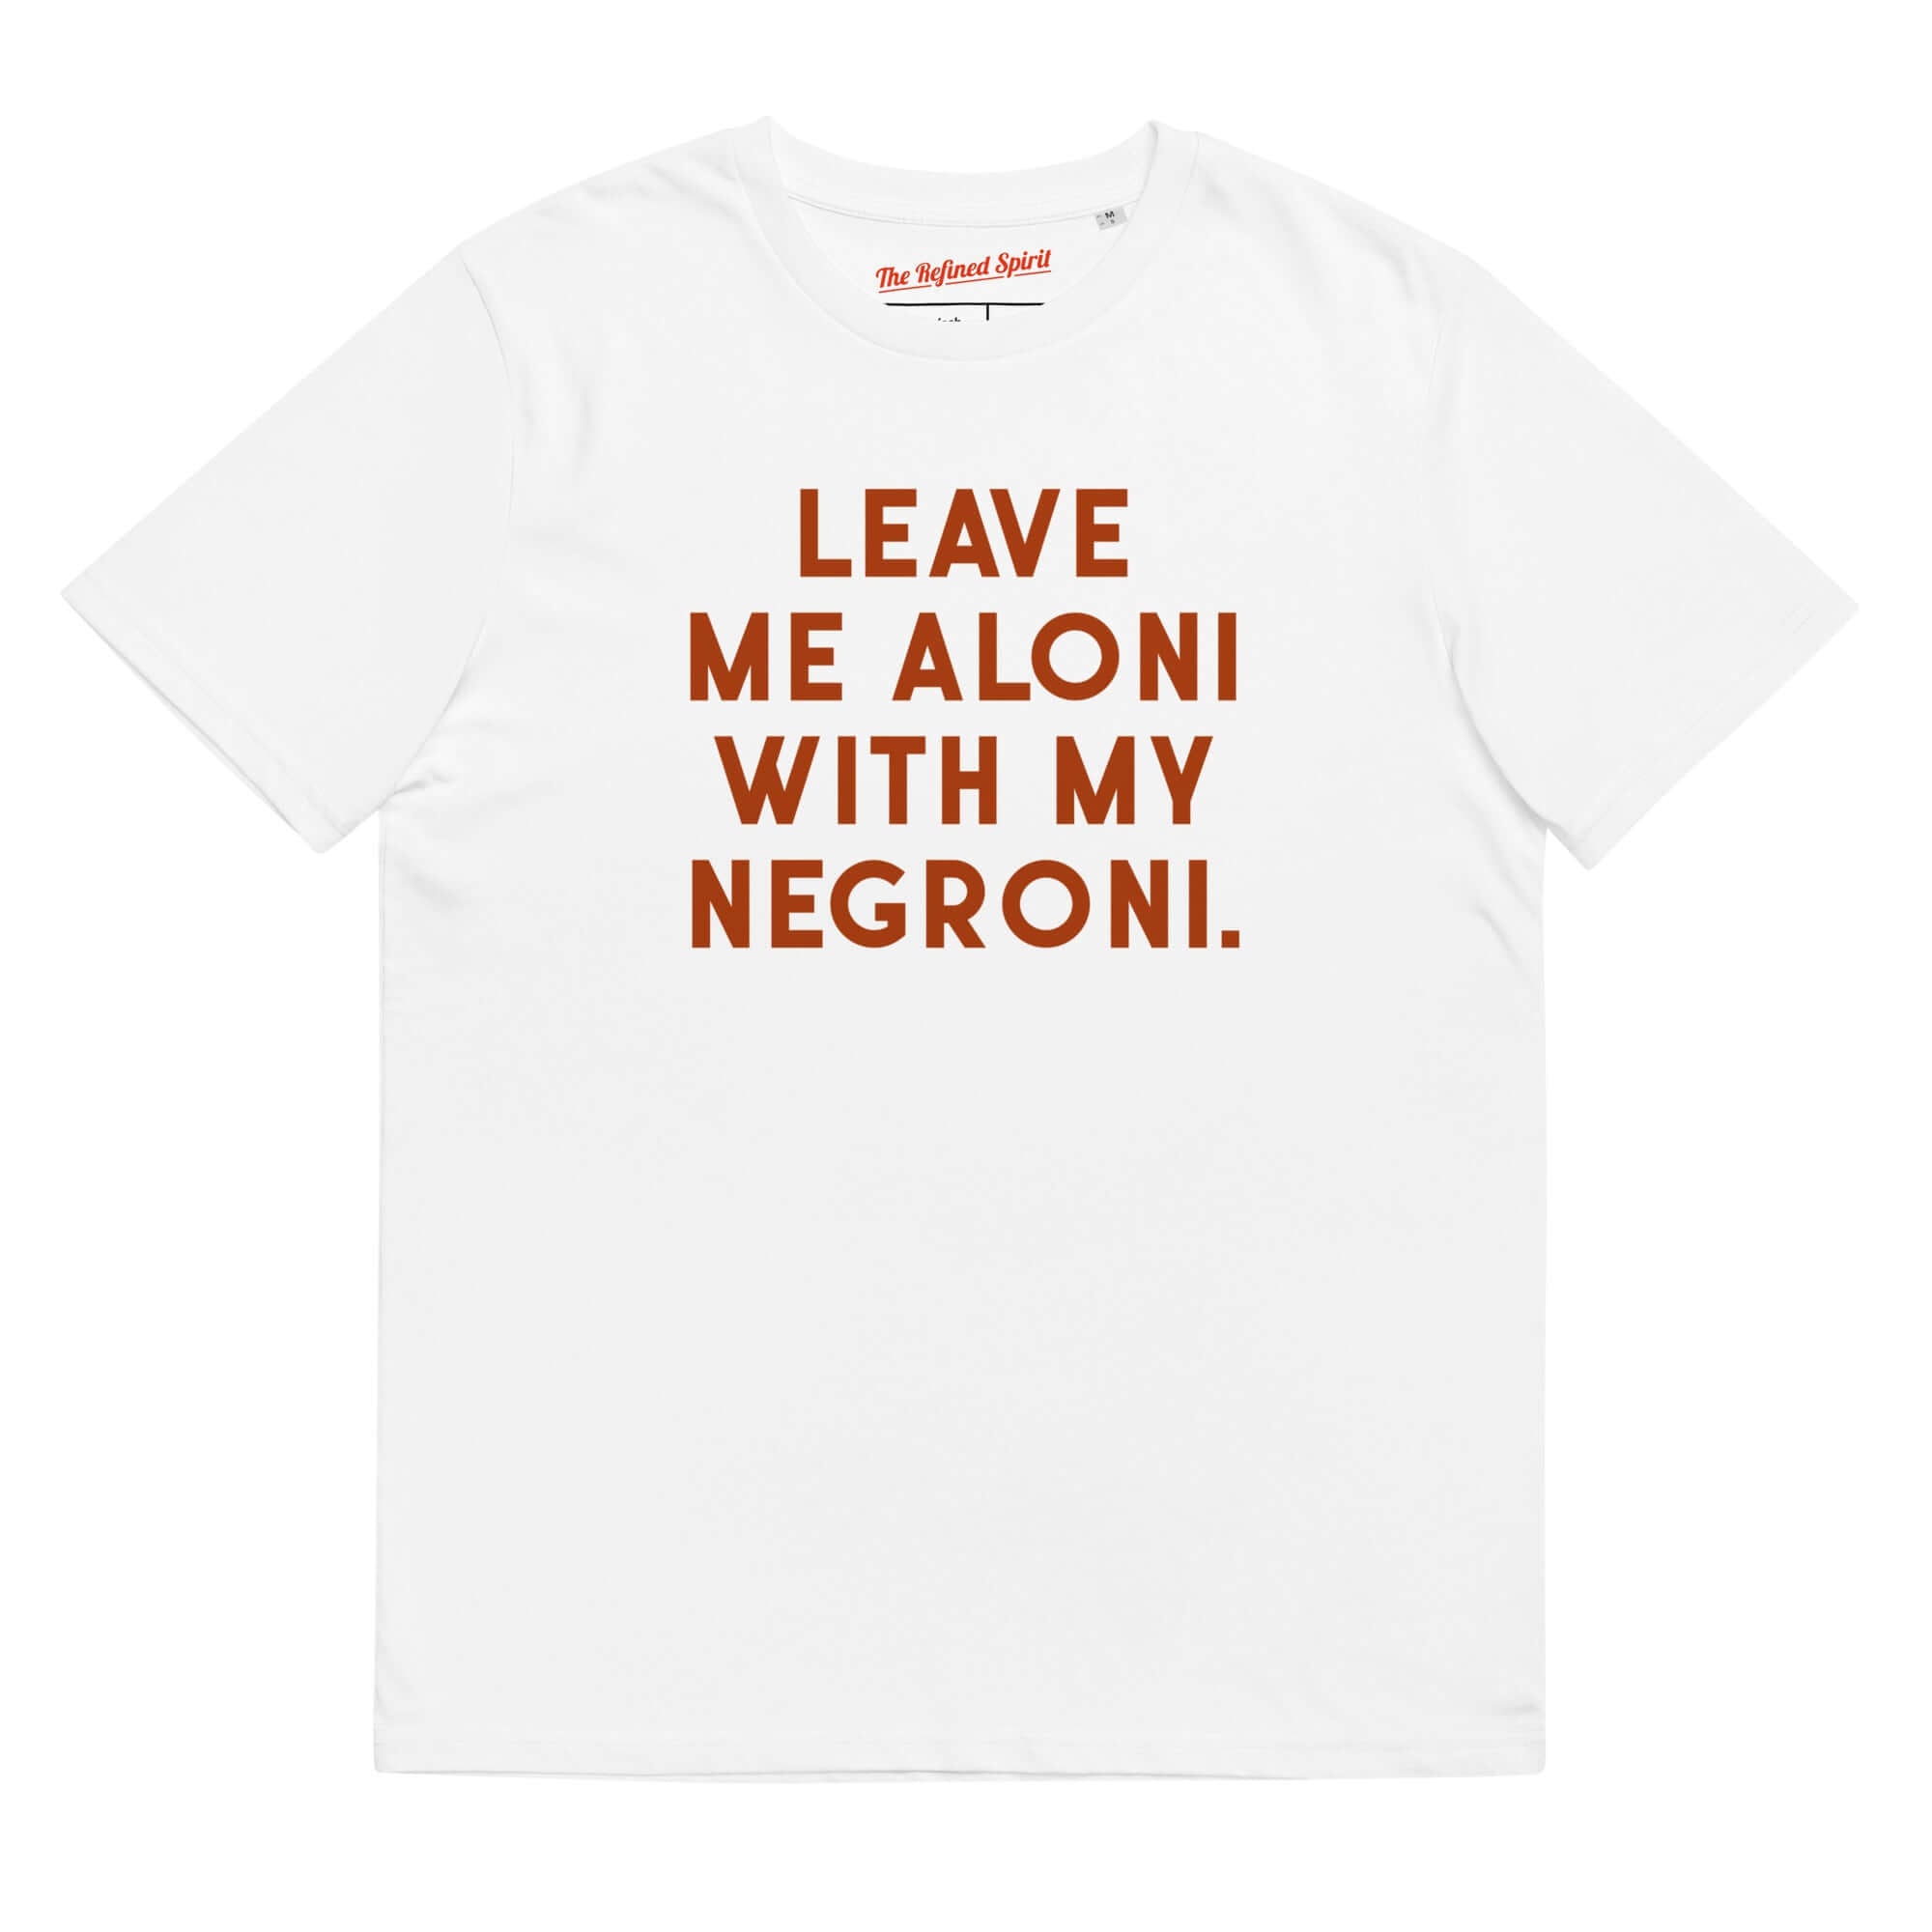 Leave me aloni with my Negroni - Organic T-shirt - The Refined Spirit